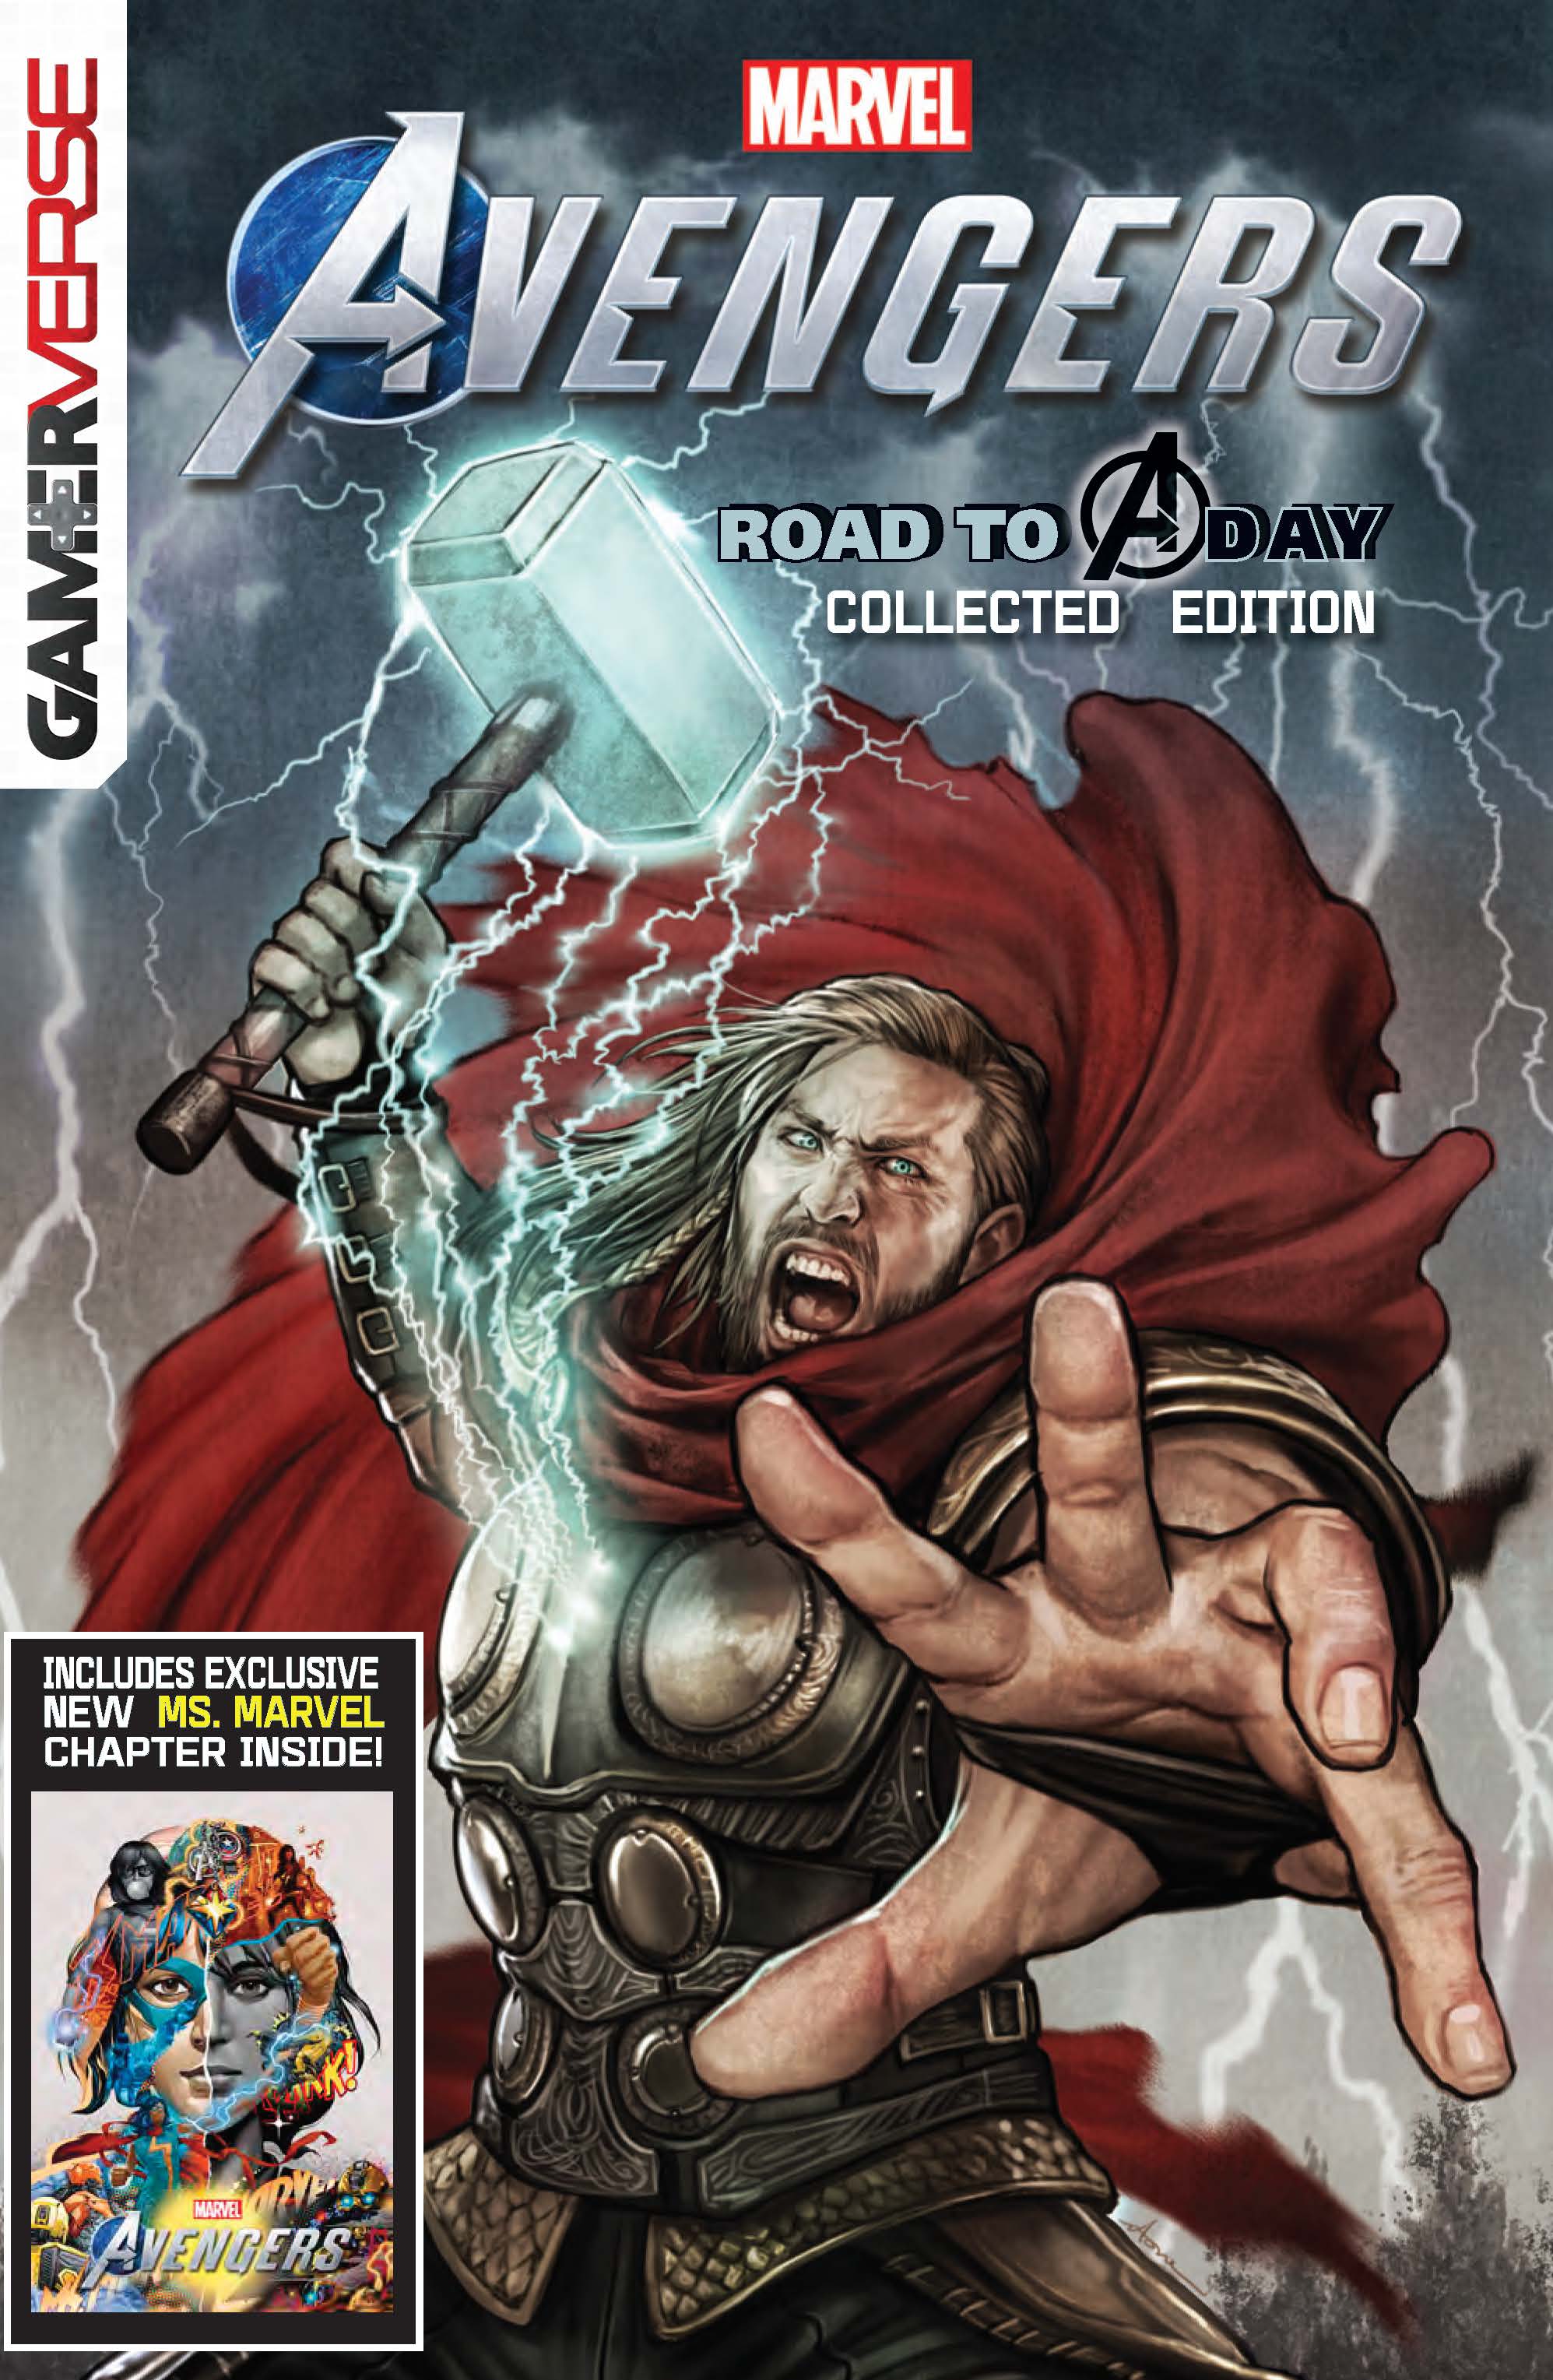 MARVEL'S AVENGERS: ROAD TO A-DAY DIGITAL COLLECTION (2020) #1